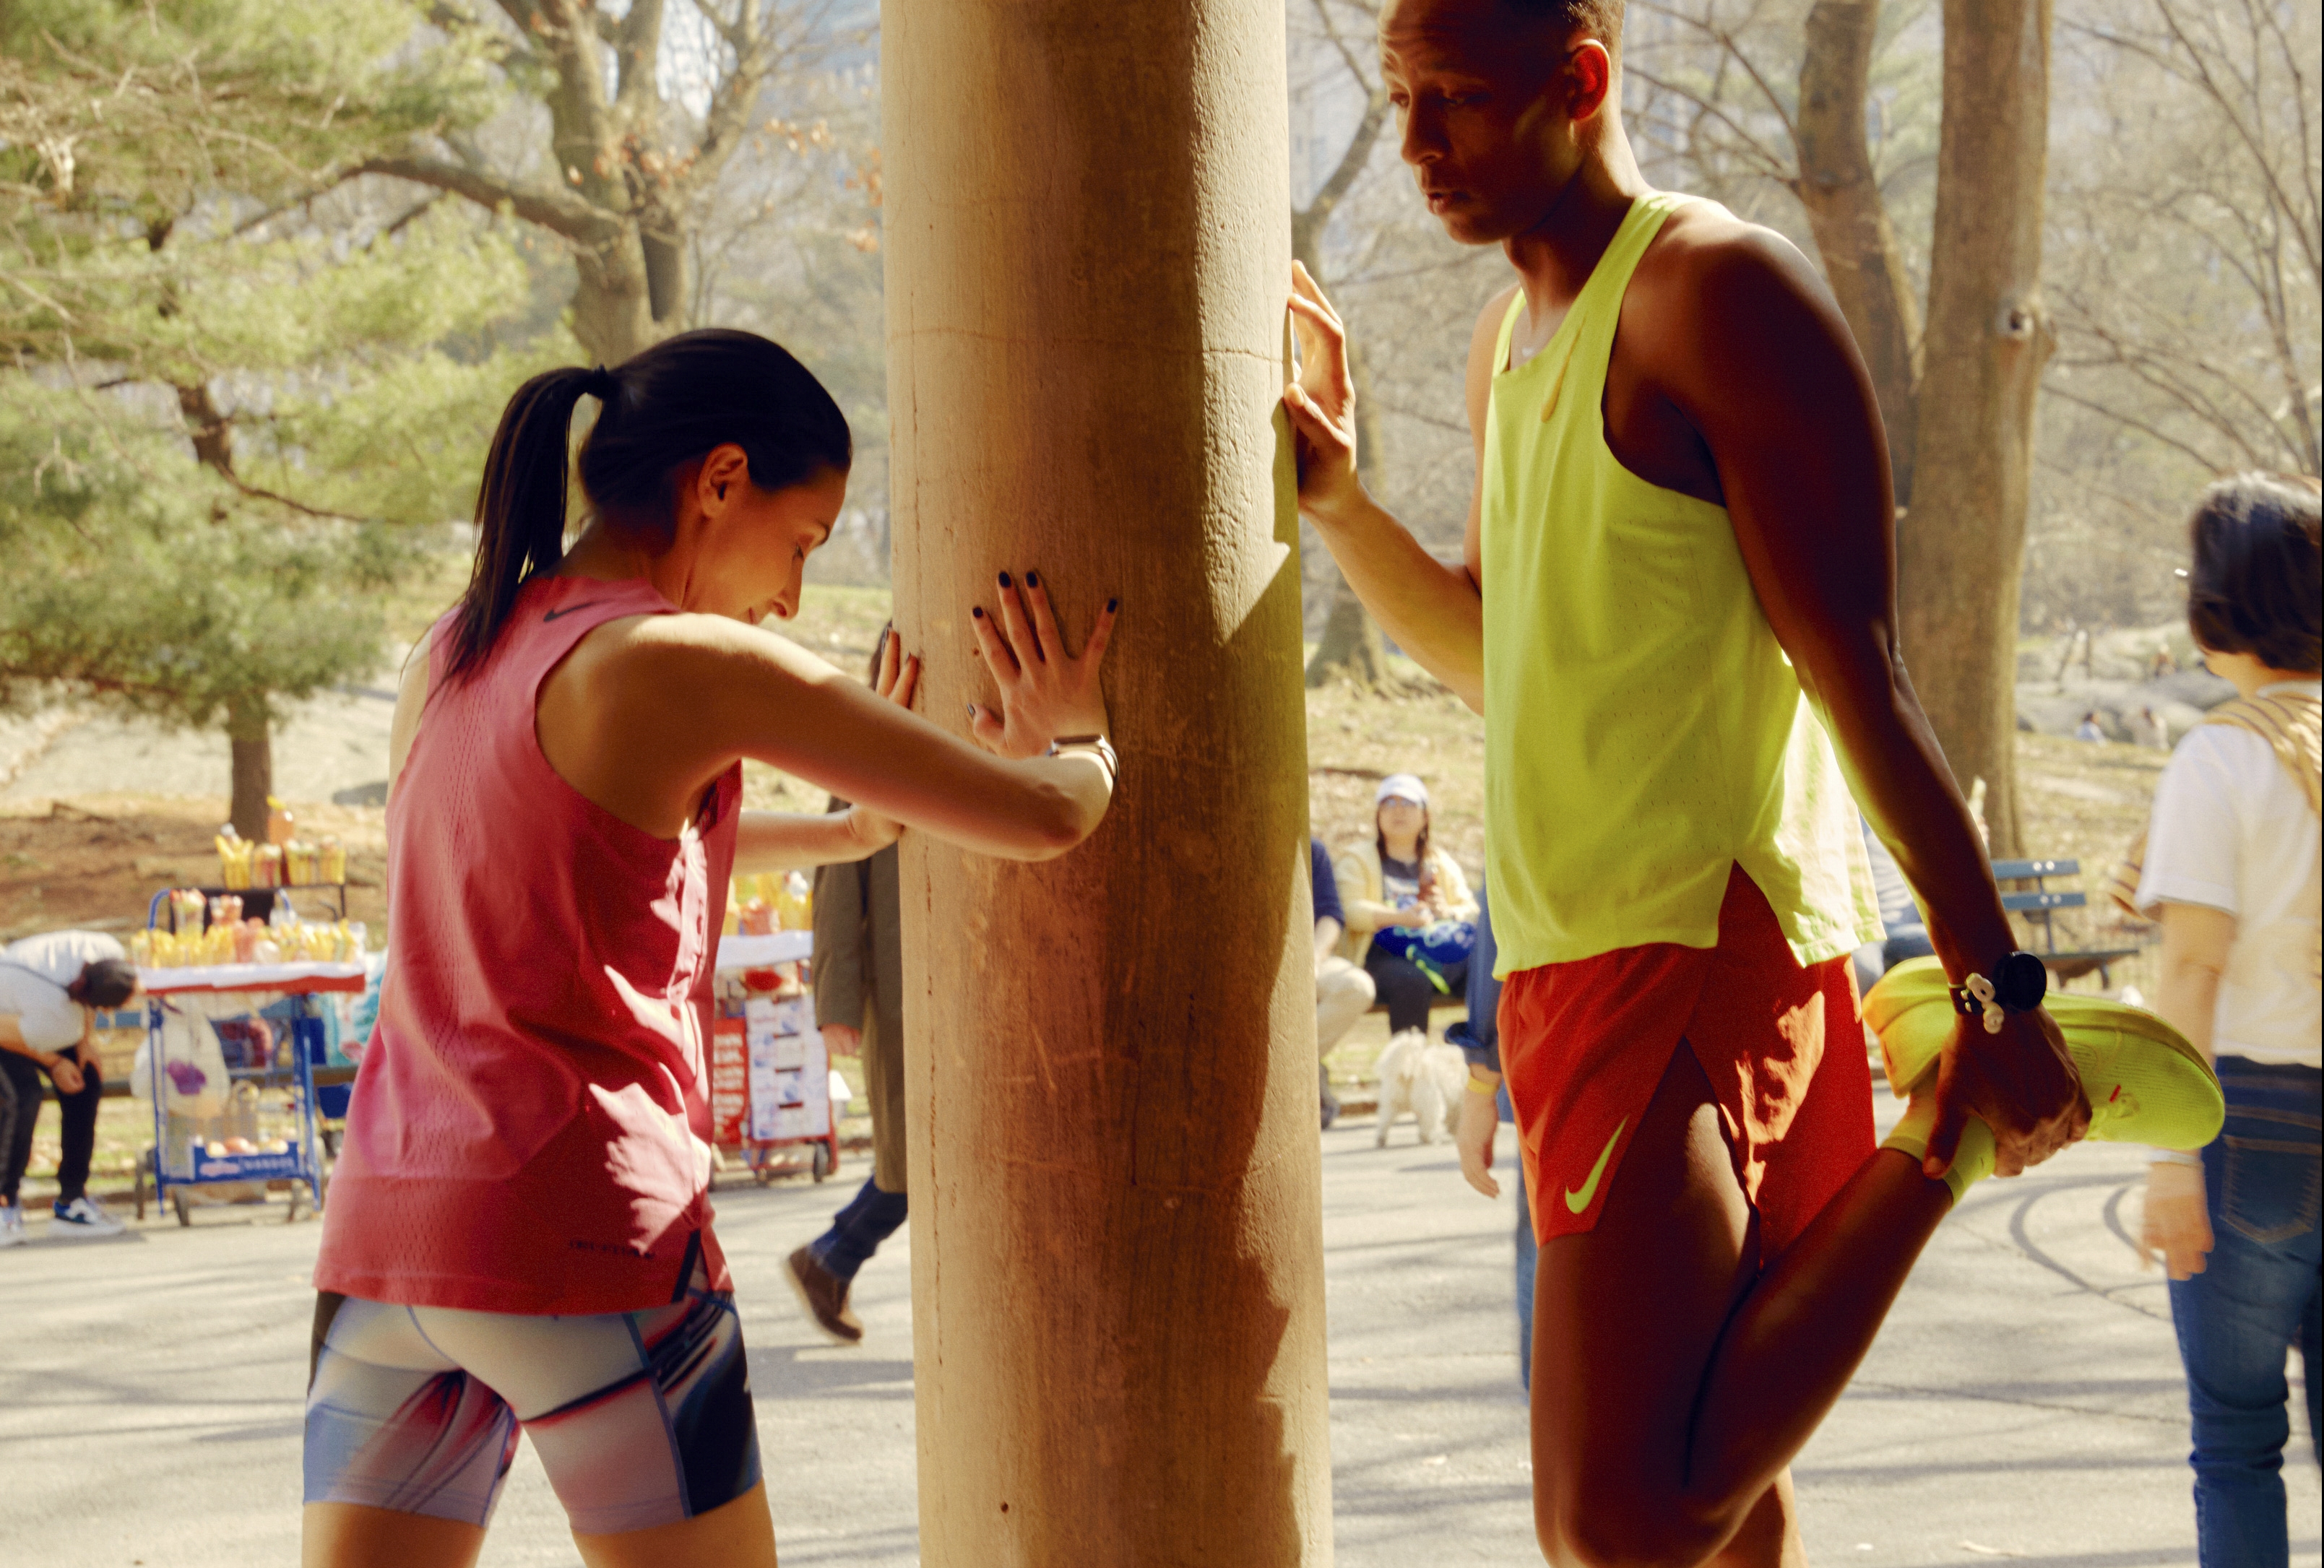 Amy Gruenhut, left, trains with Nick Arrington in Central Park in New York, March 14, 2024. After a debilitating disease, Gruenhut was unable to walk, eat or speak. Today she runs marathons. Among other things, she credits her group of running buddies. (Peter Garritano/The New York Times)